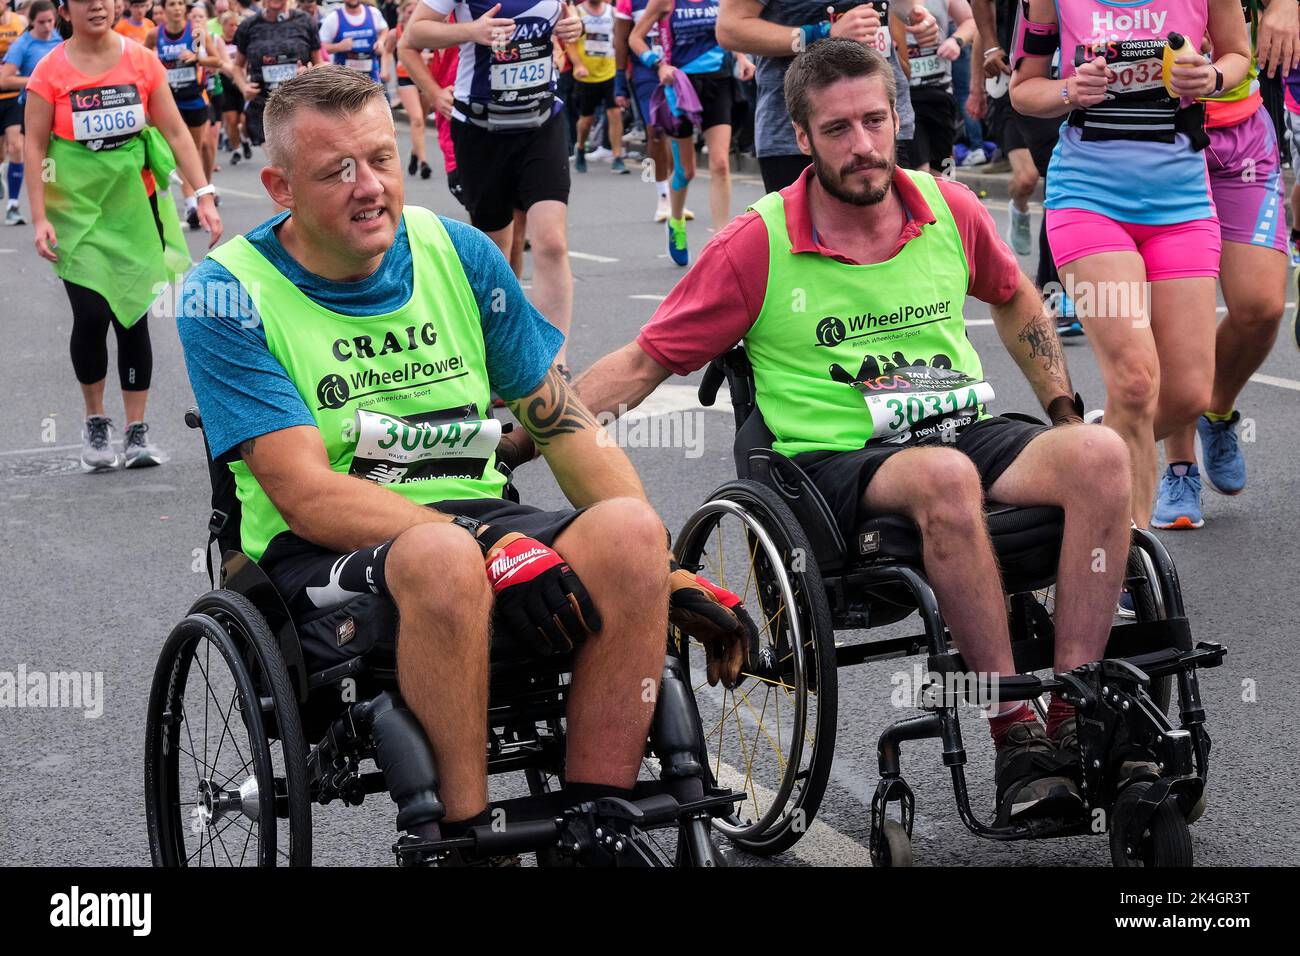 London UK, 2nd October 2022.  More than 40,000 participants take to the streets of the capital for the 42nd London Marathon. The event which attracts elite runners and wheelchair athletes also raises millions of pounds for charity through the participation of club and fitness runners along with those just wanting to take on the 26 mile challenge. Stock Photo